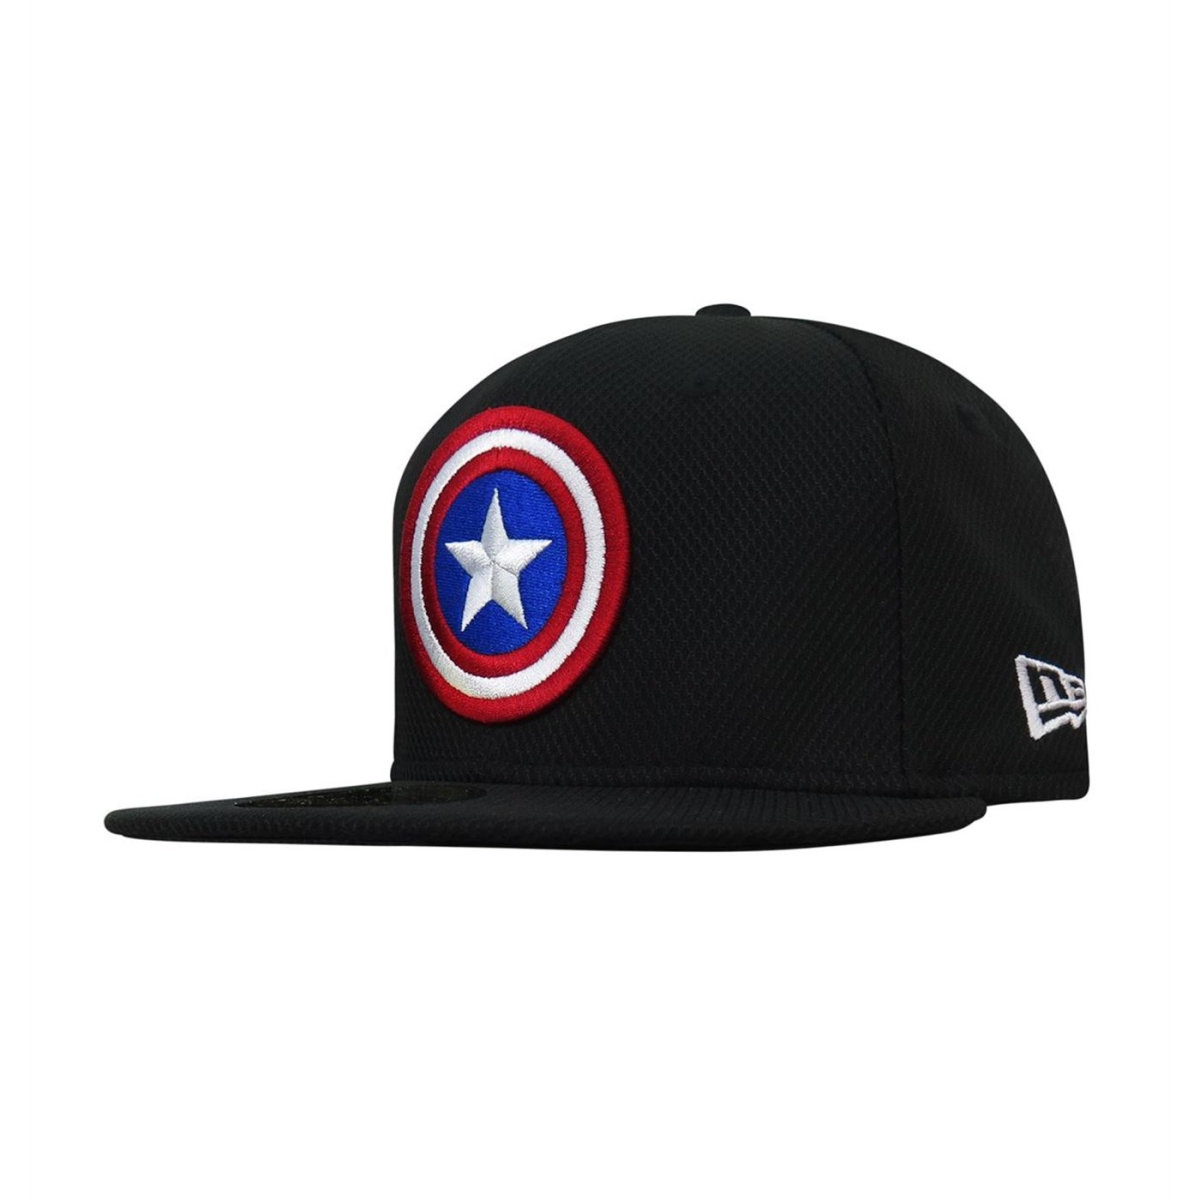 Picture of Captain America hatcapshldsym5950-714-7 1-4 Fitted Captain America Shield Black 59Fifty Fitted Hat - Size 7.25